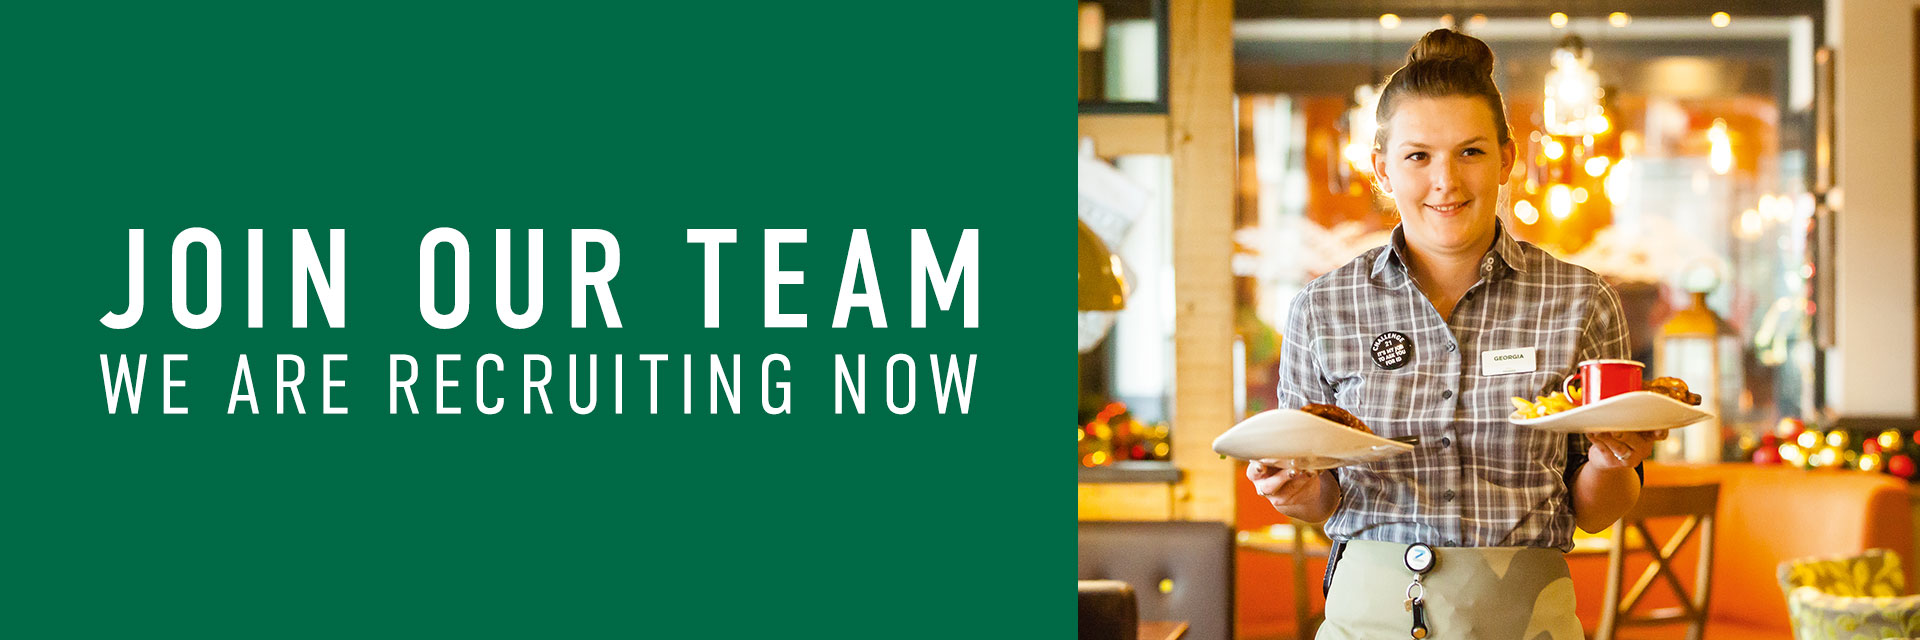 Join our family at Harvester